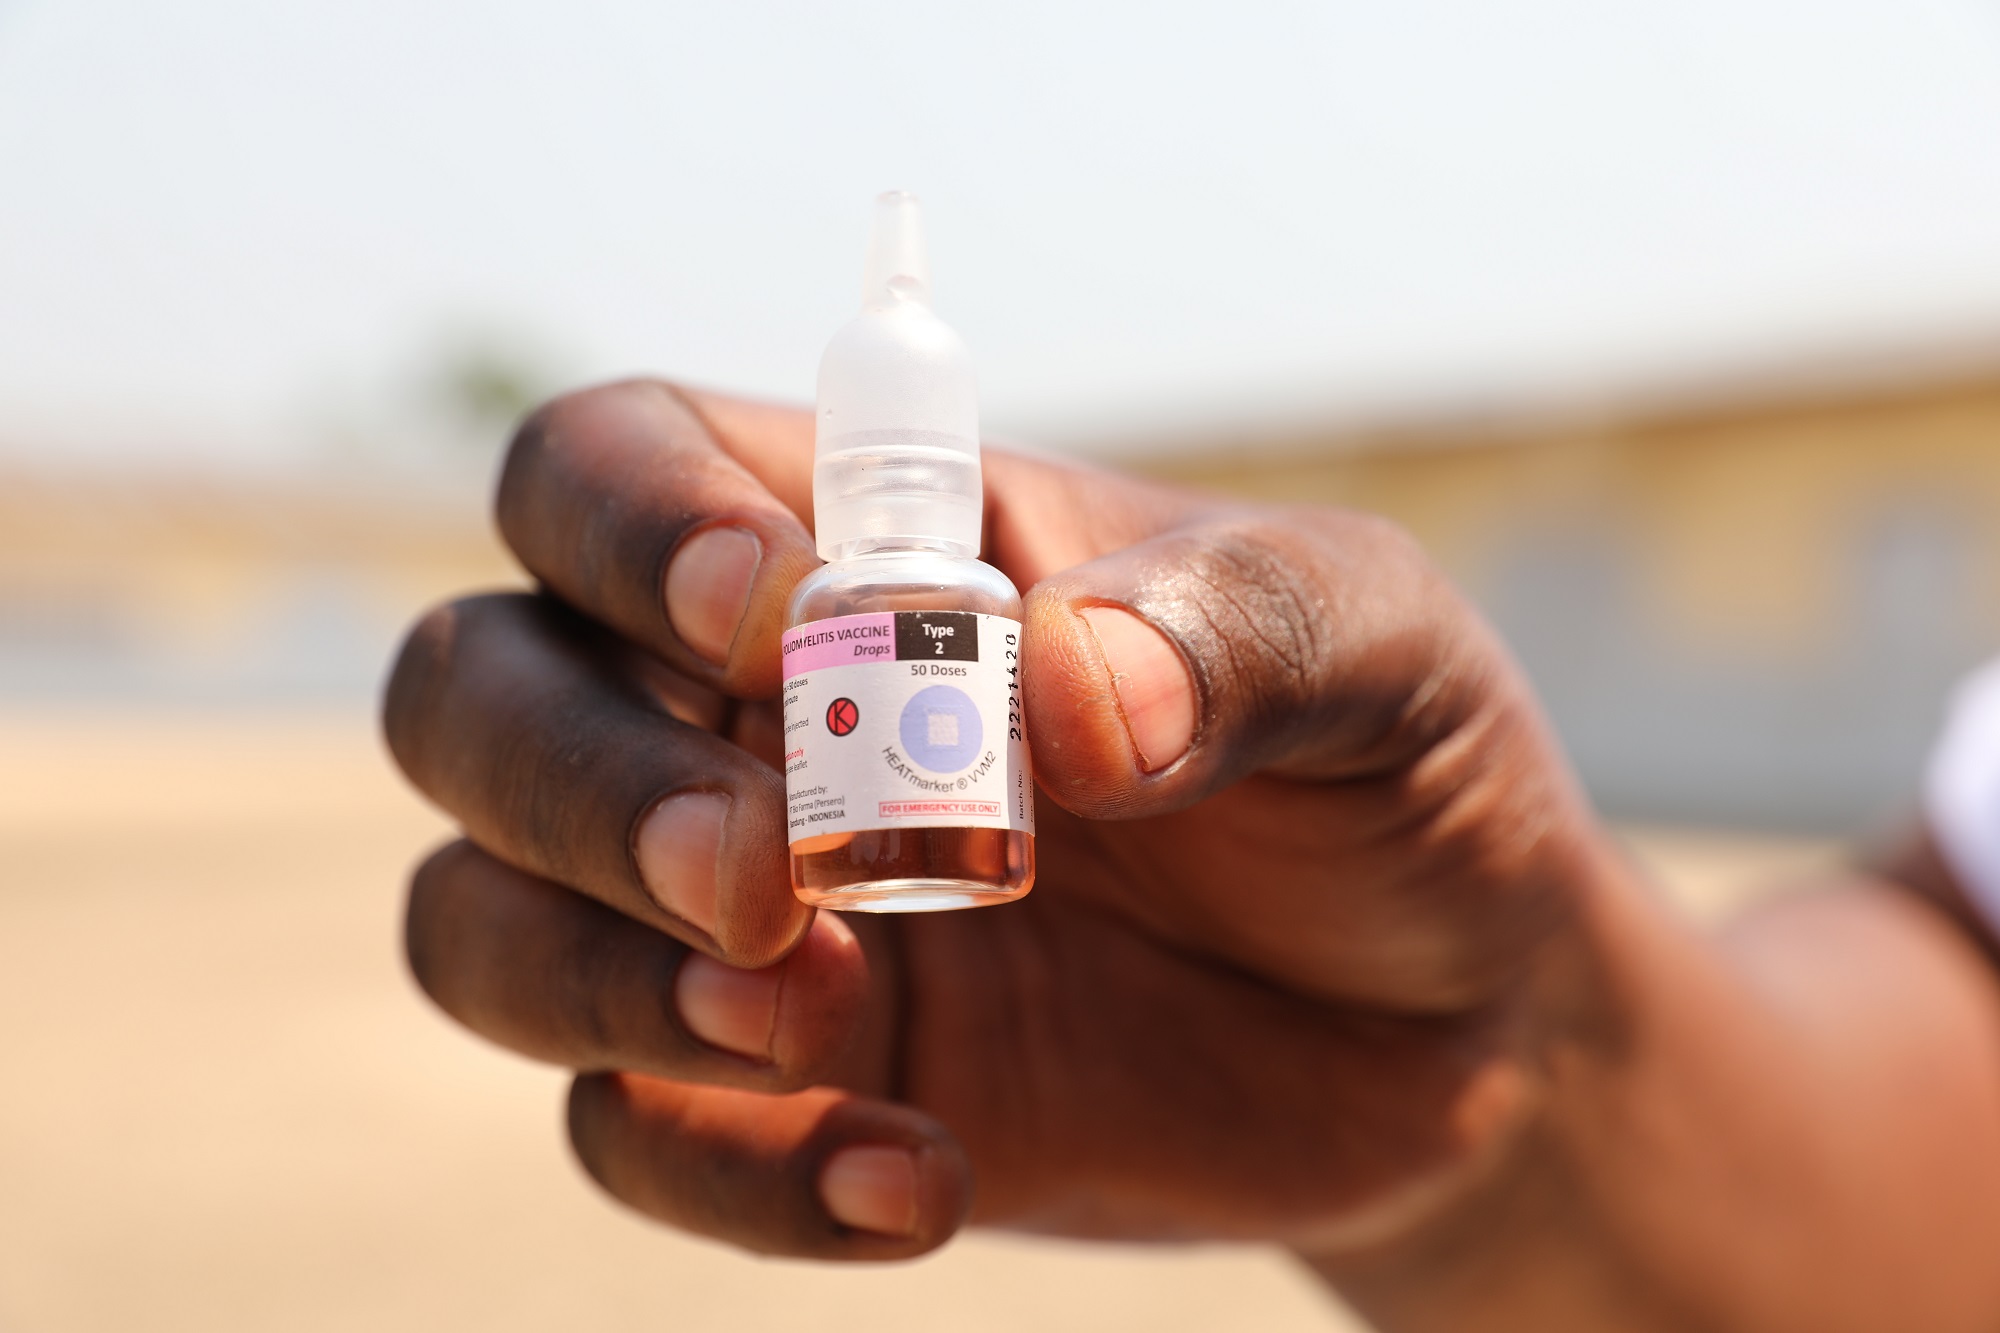 A hand holding a small bottle of vaccine